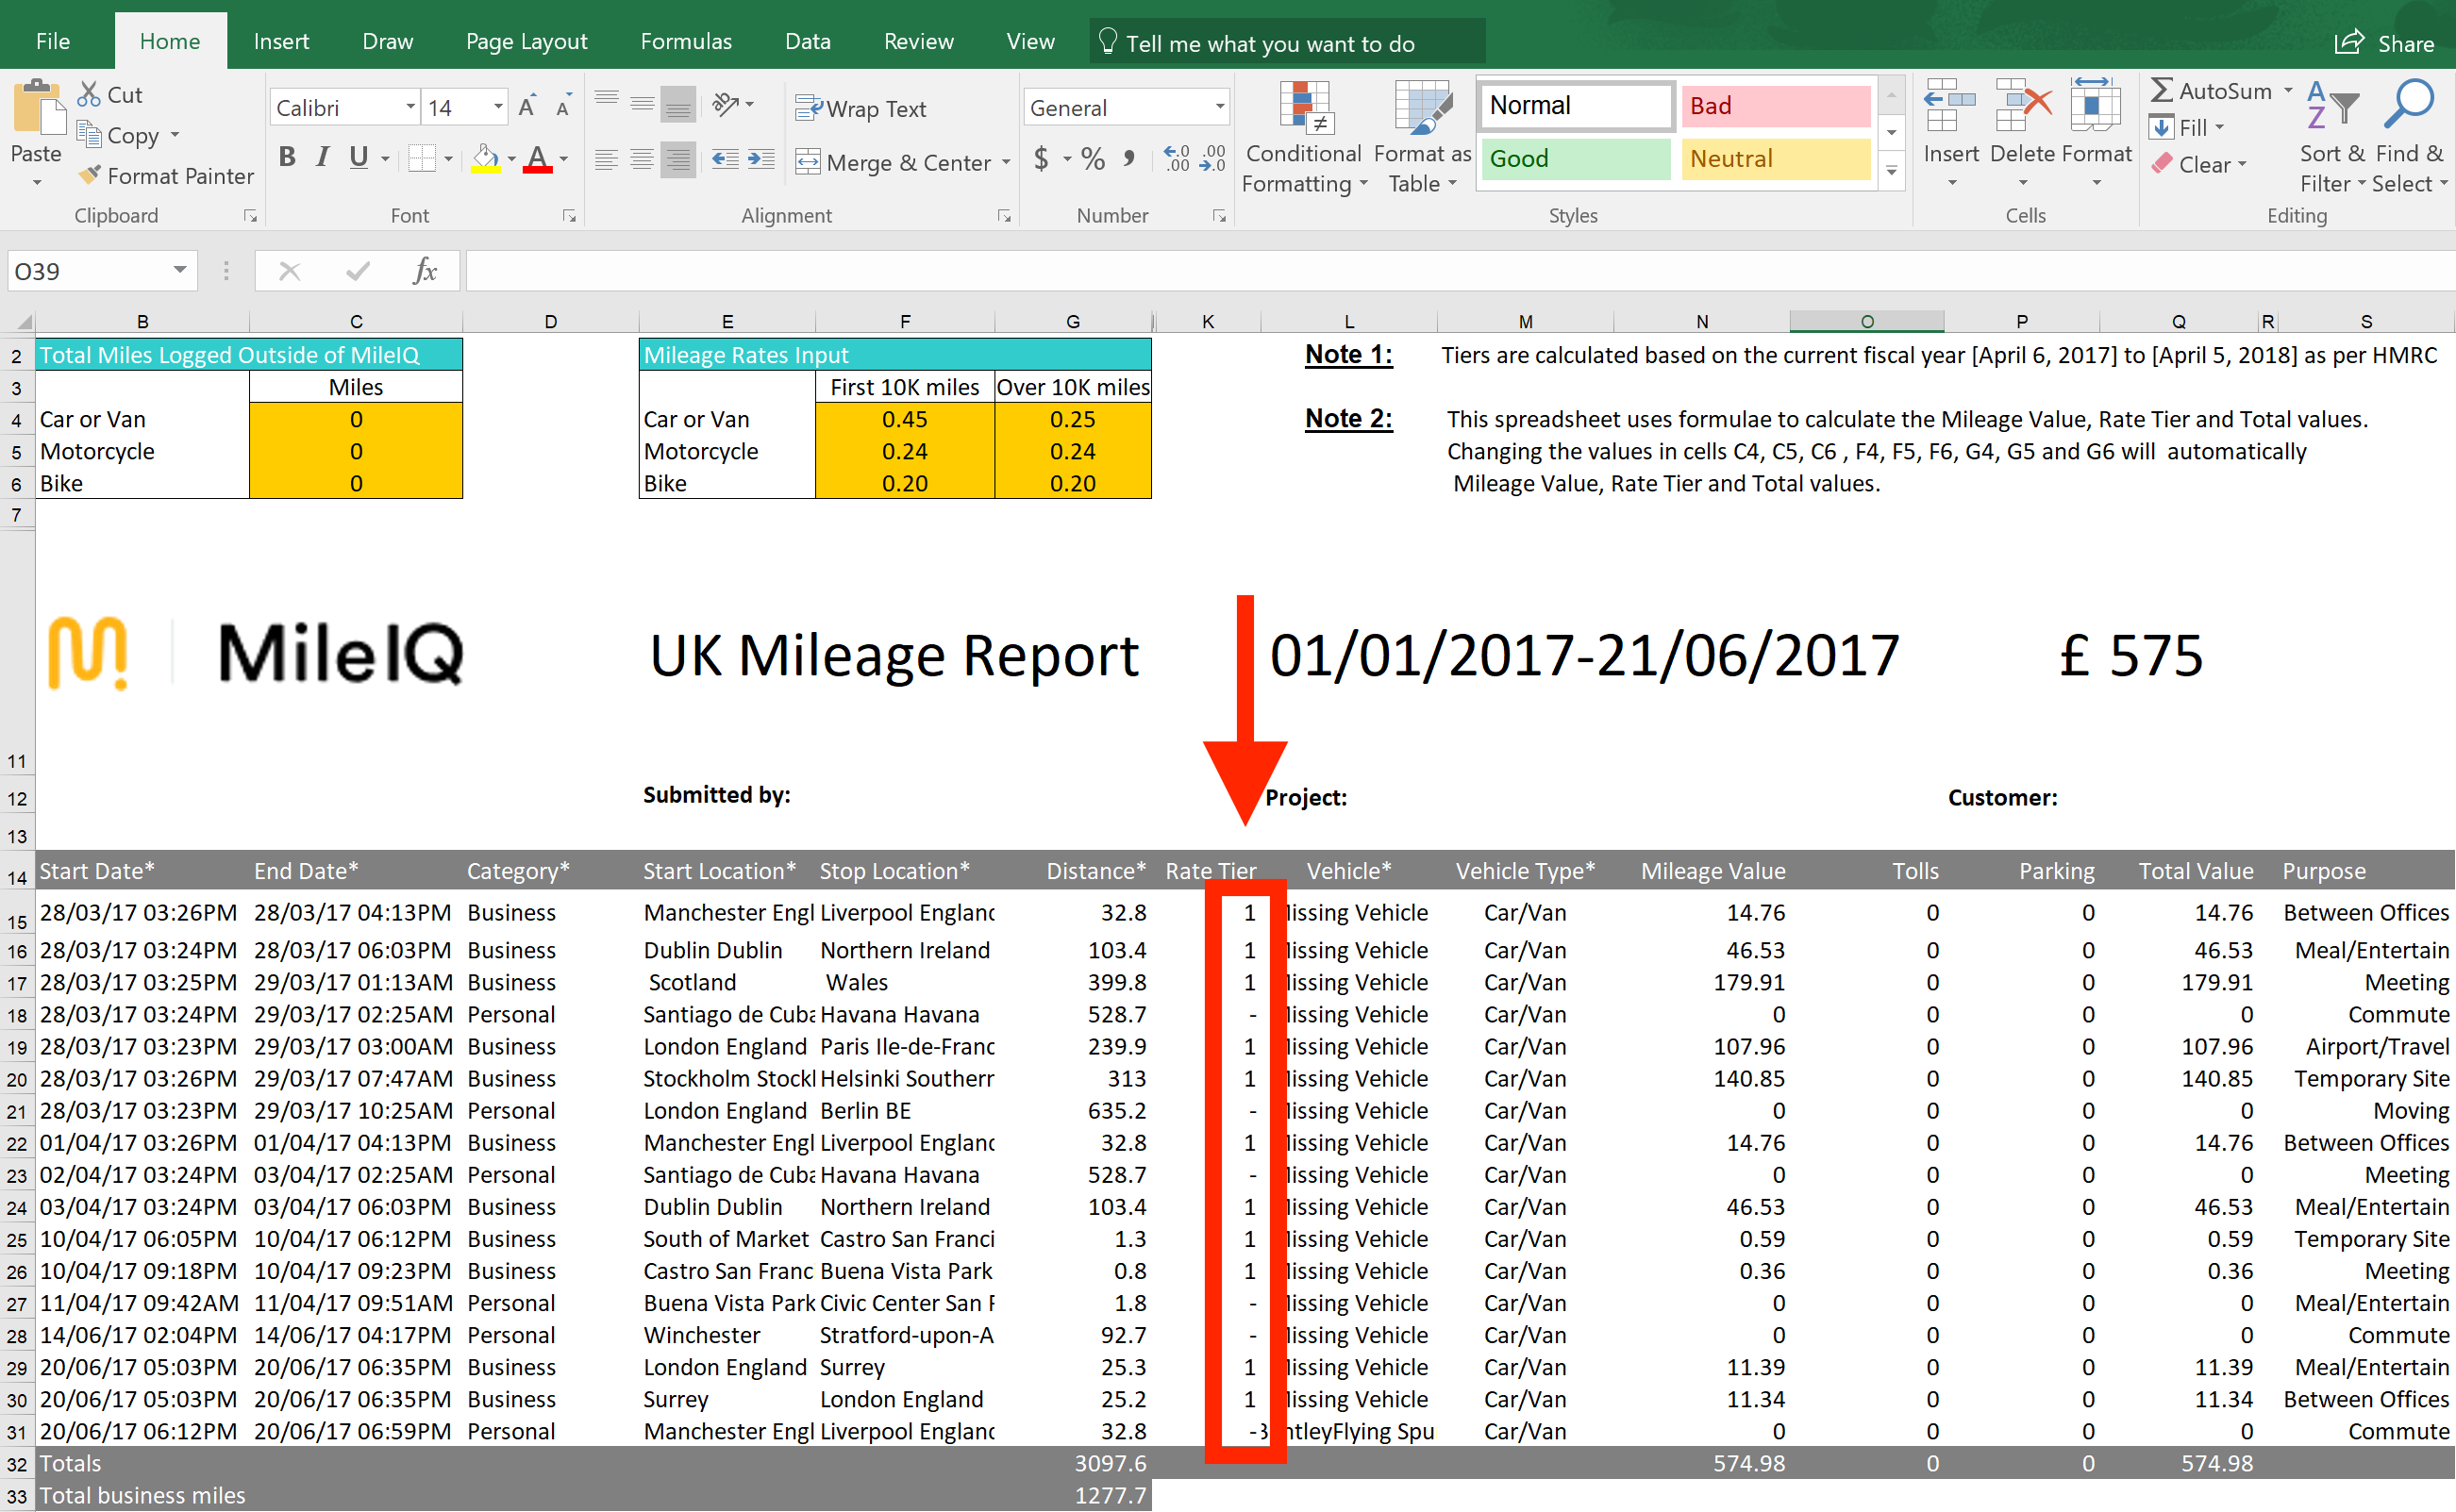 This image shows the tiered mileage report, highlighting the rate tier.